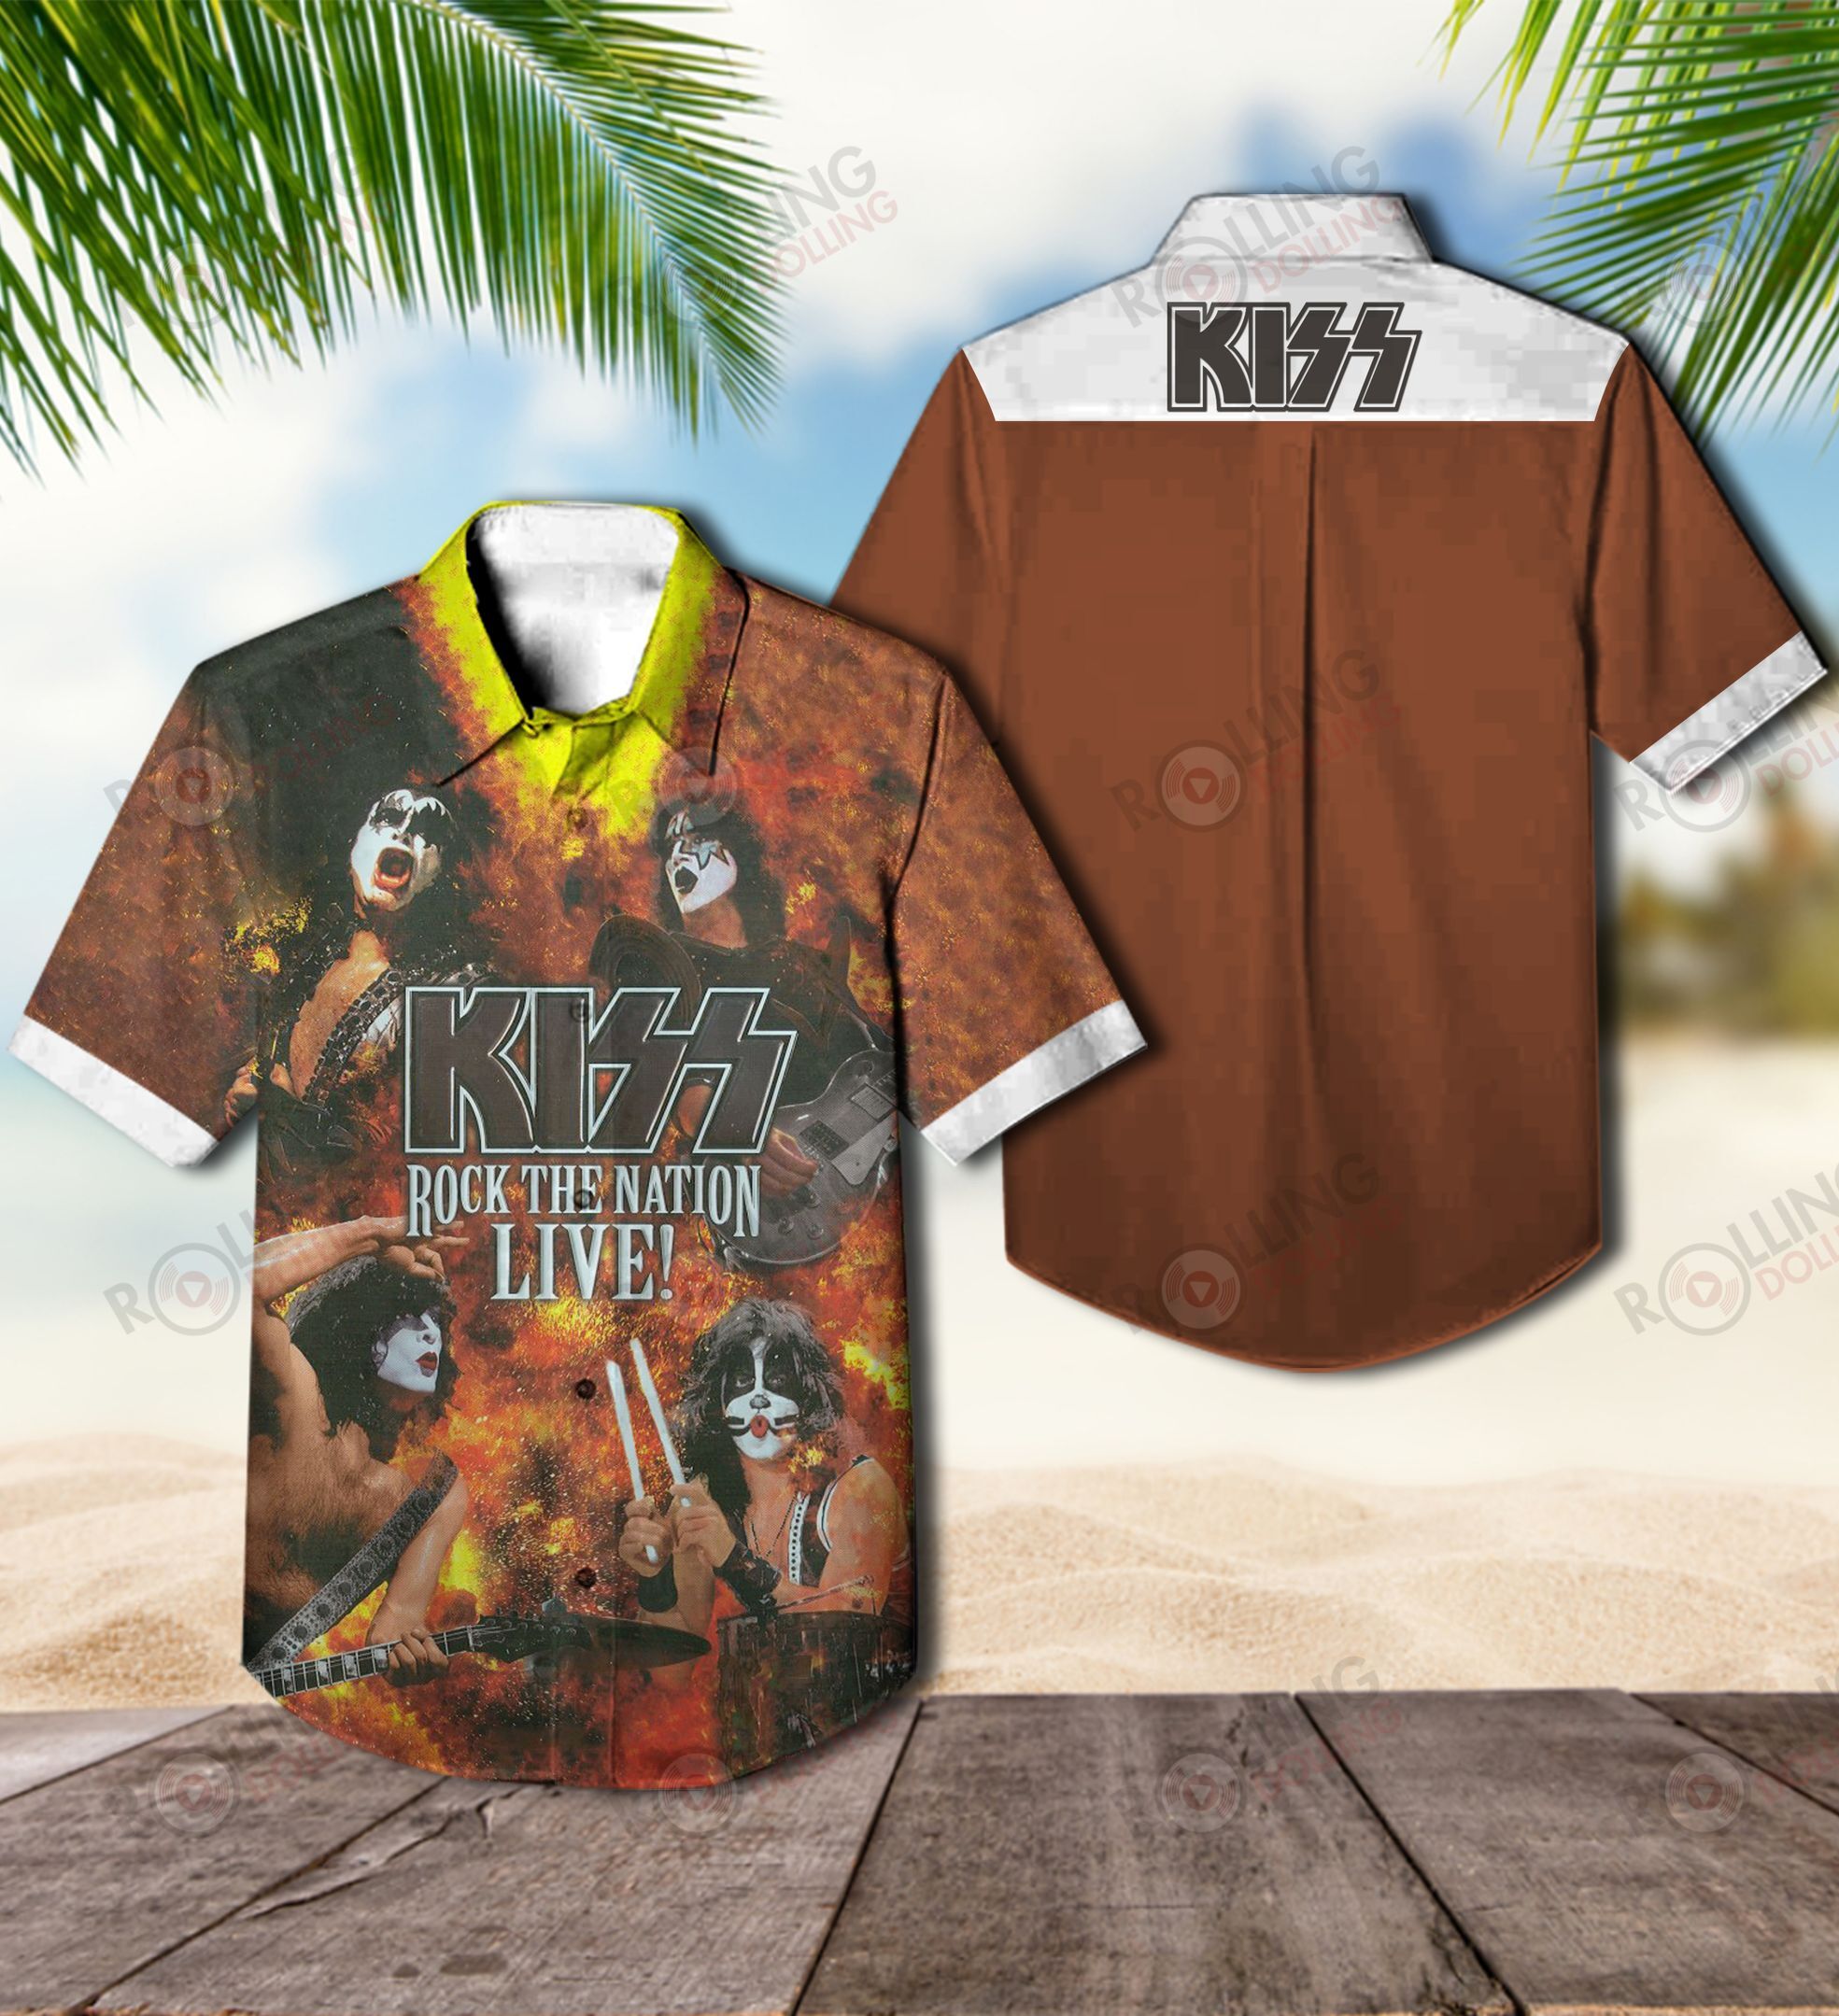 For summer, consider wearing This Amazing Hawaiian Shirt shirt in our store 39